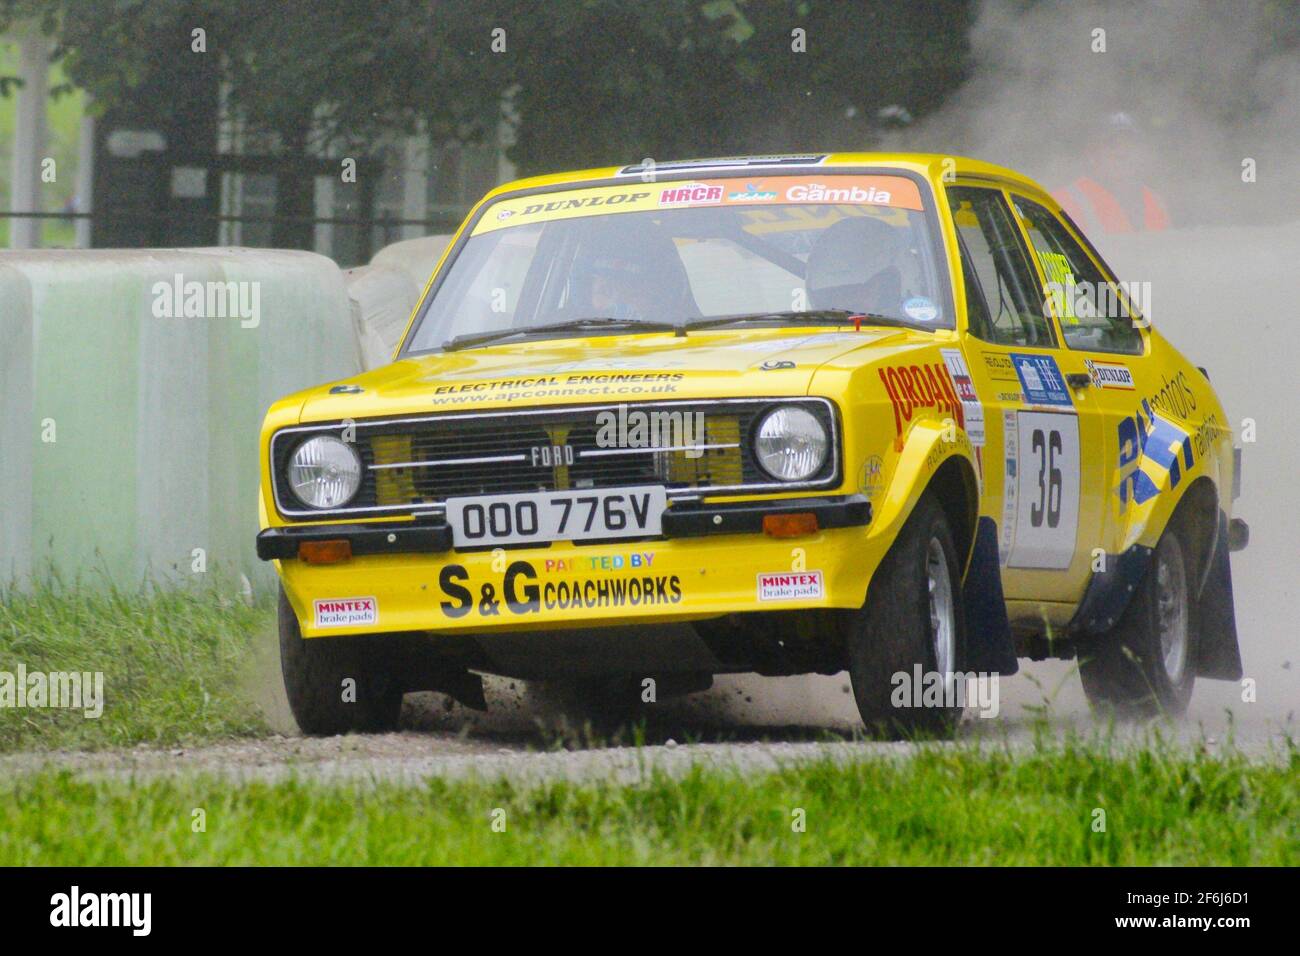 Ford Escort Mk2 cars rebuilt as rally cars seen at the rally event at Chatsworth house 2008. Stock Photo